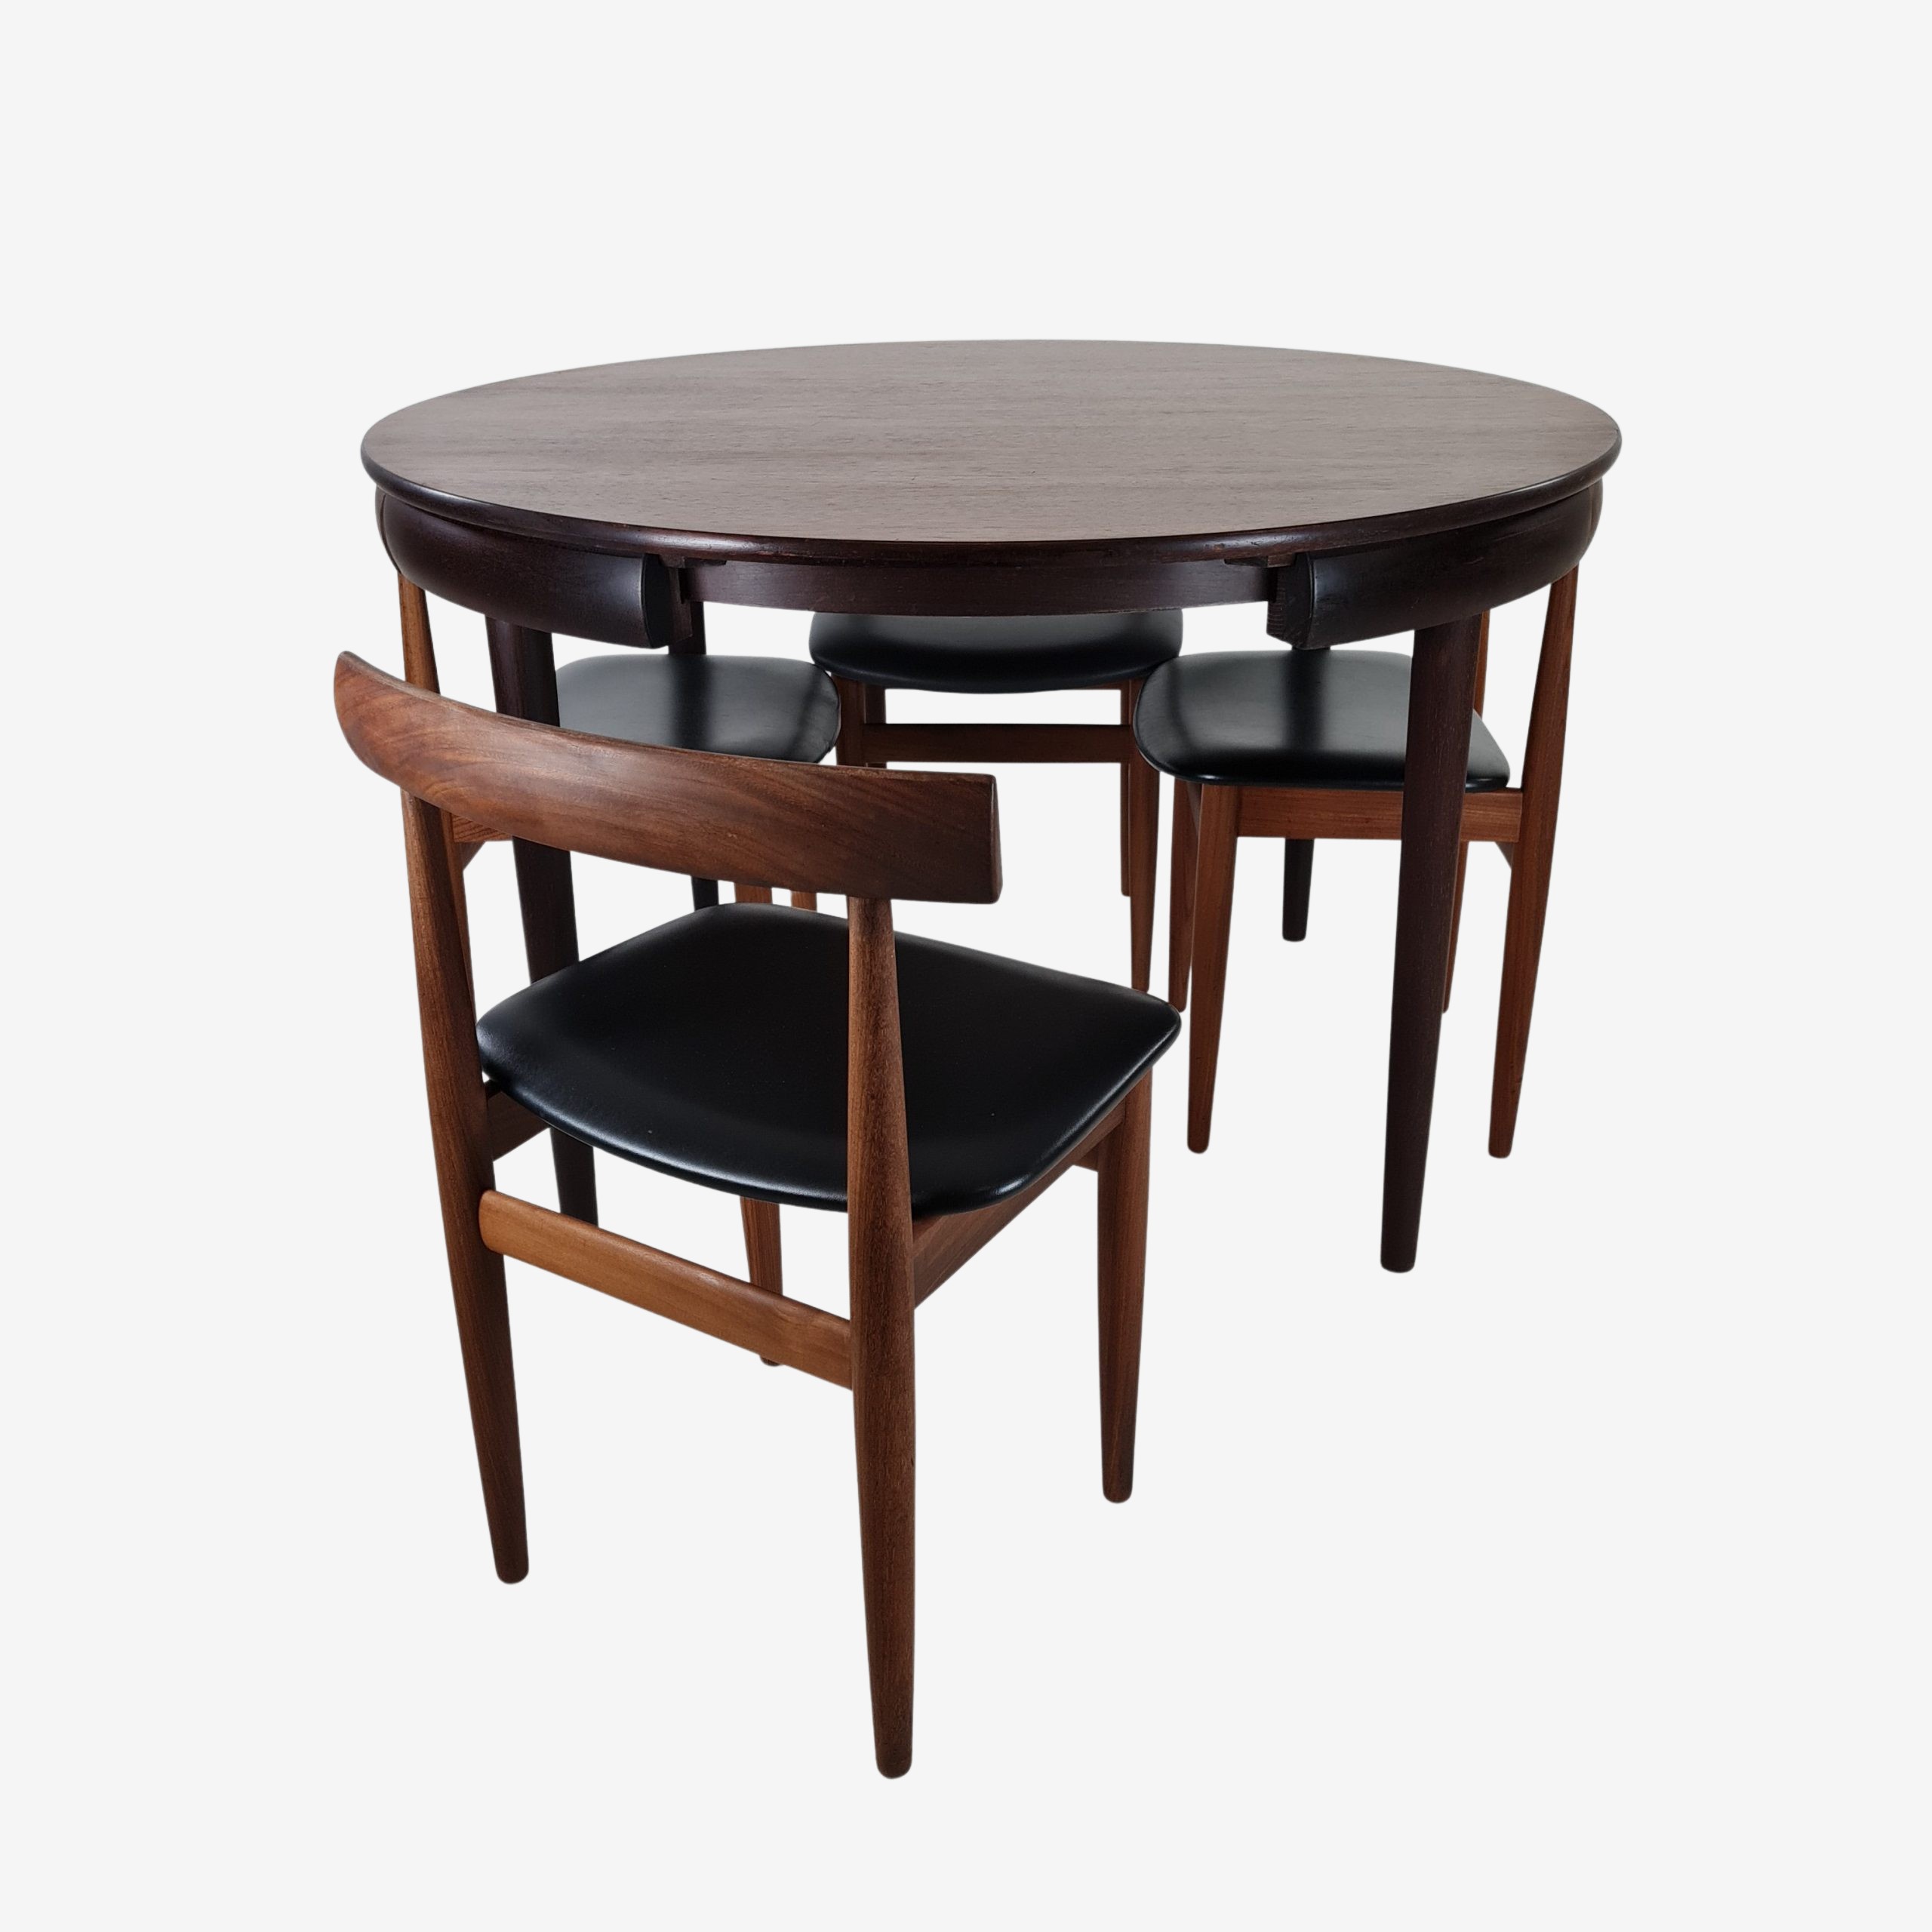 Round dining table & four chairs model Roundette | Hans Olsen | Forward Røjle | Rarely seen in rosewood